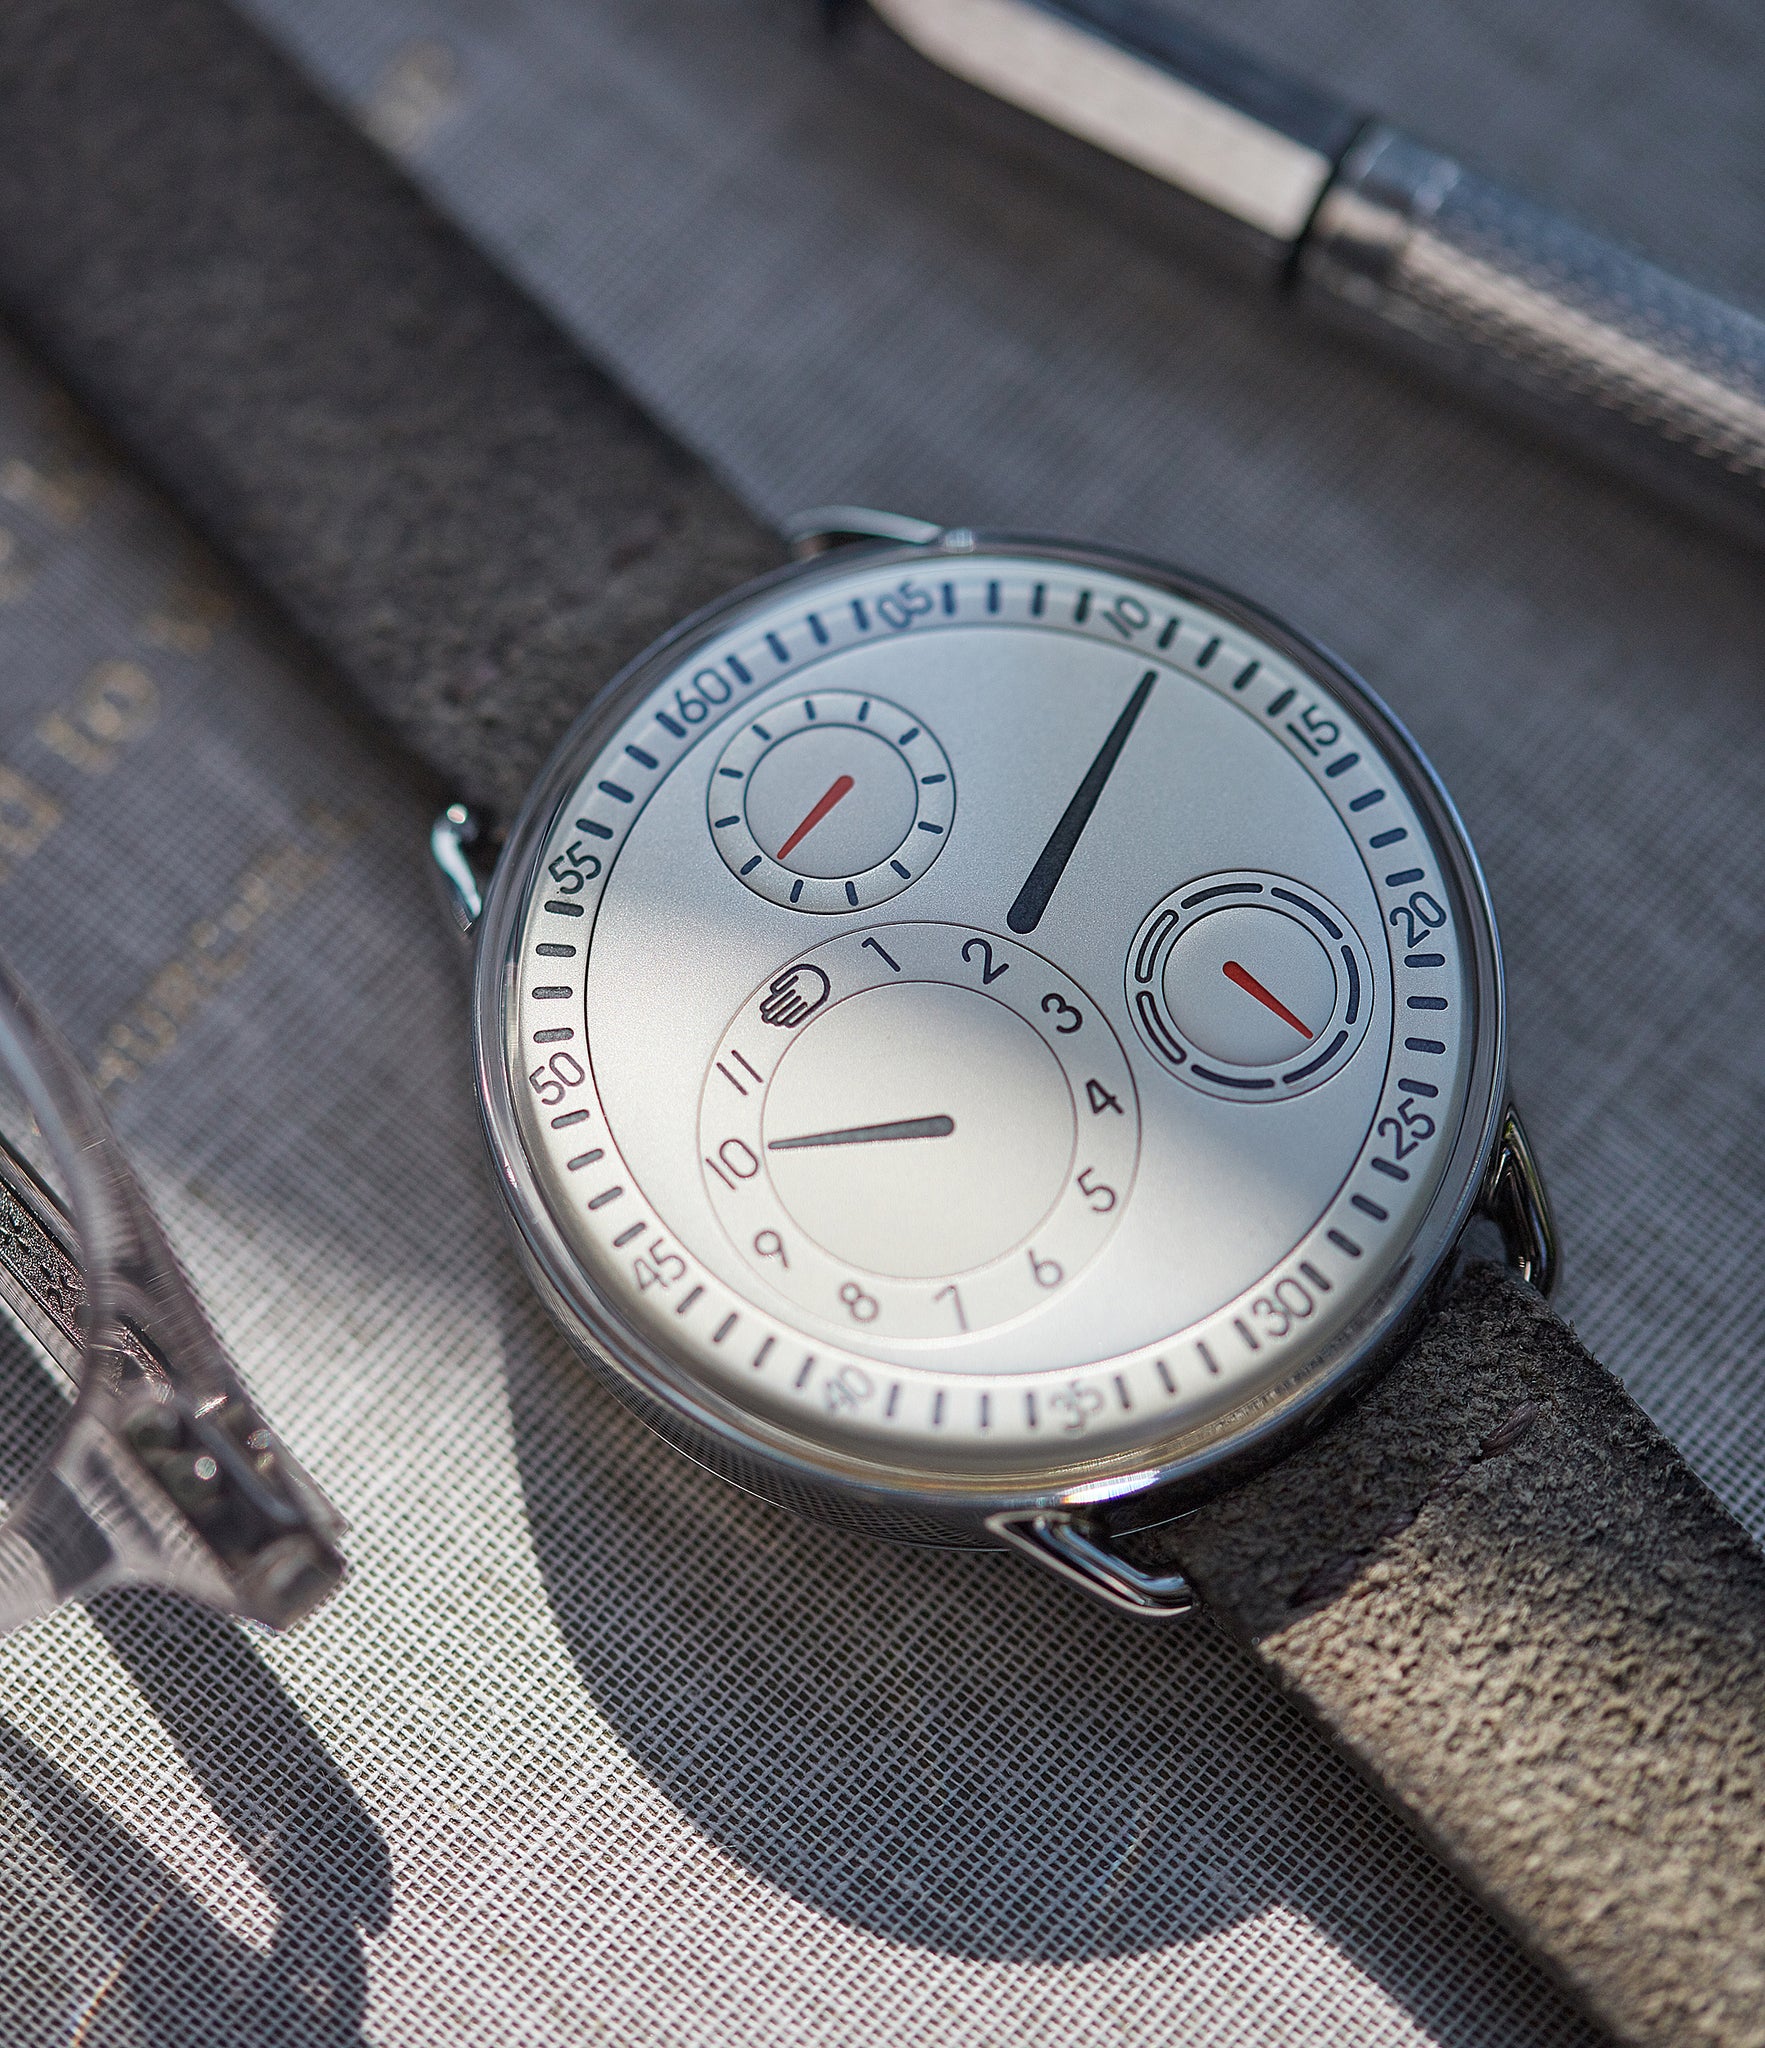 Ressence Type 1W white independent watchmaker for sale online at A Collected Man London UK specialist of rare watches